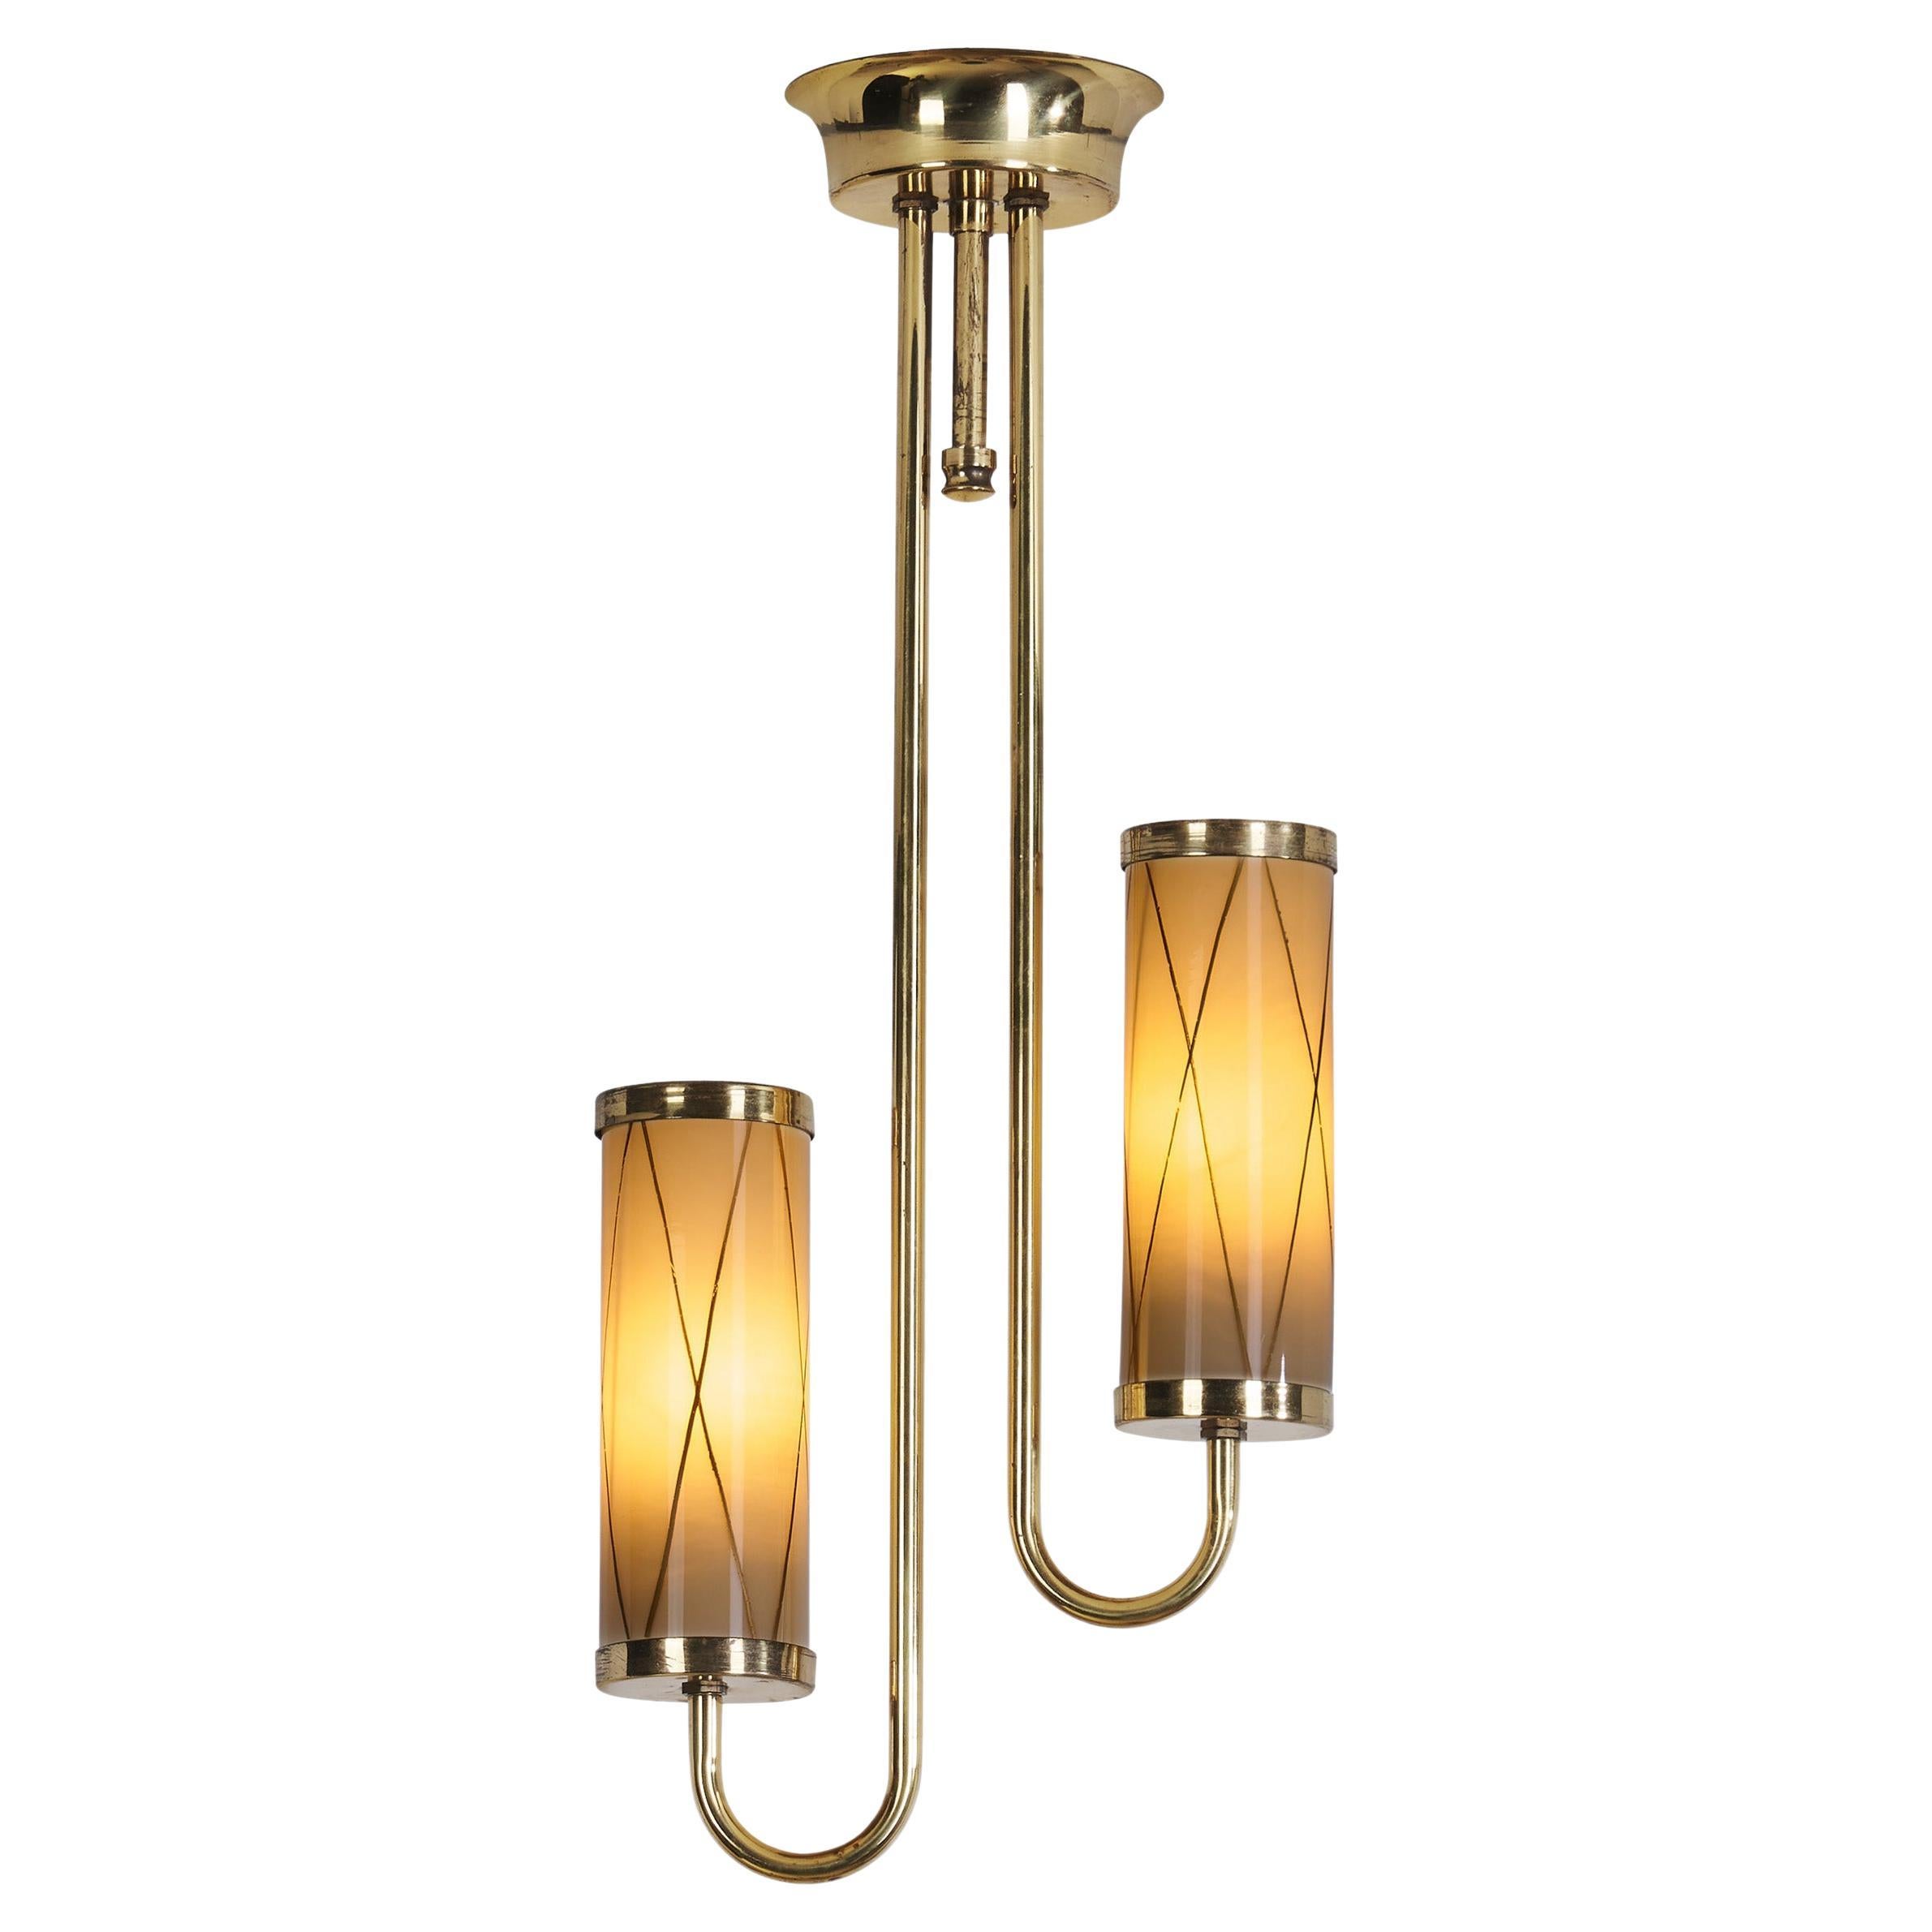 Brass Ceiling Lamp with Decorative Cylindrical Glass Shades, Europe Ca 1950s For Sale